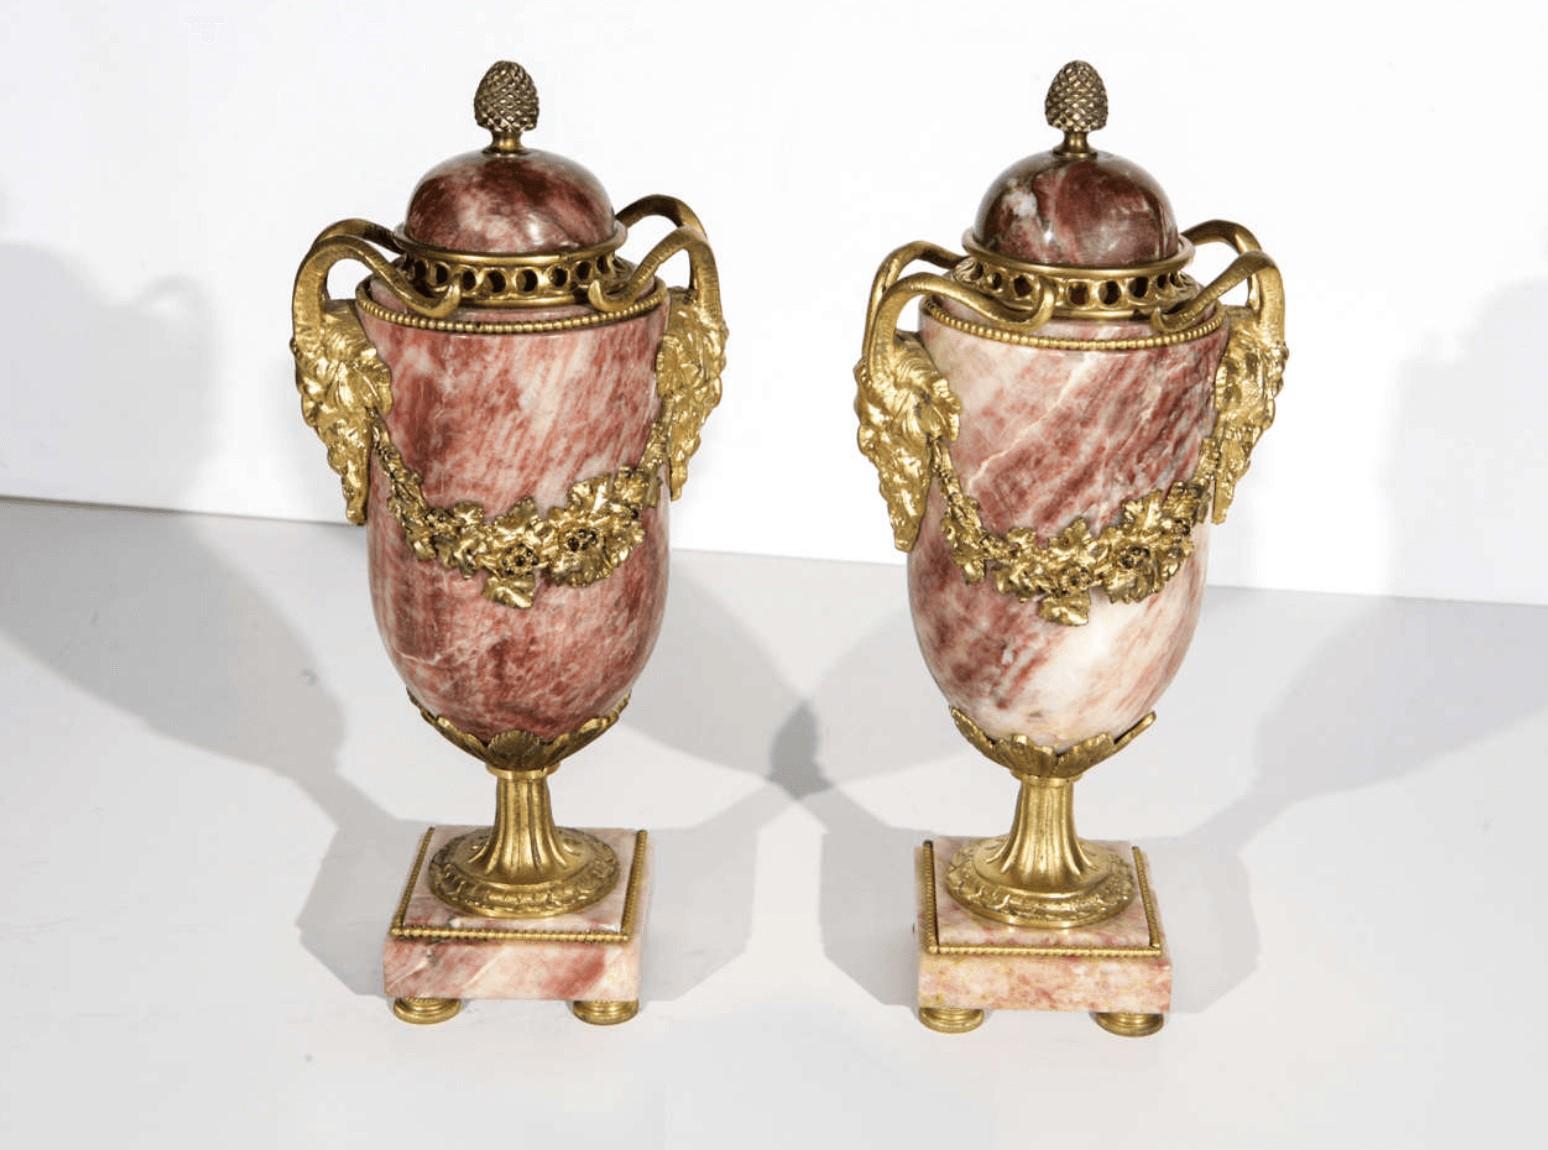 Pair of Stylized 19th Century Gold Plated Urns.